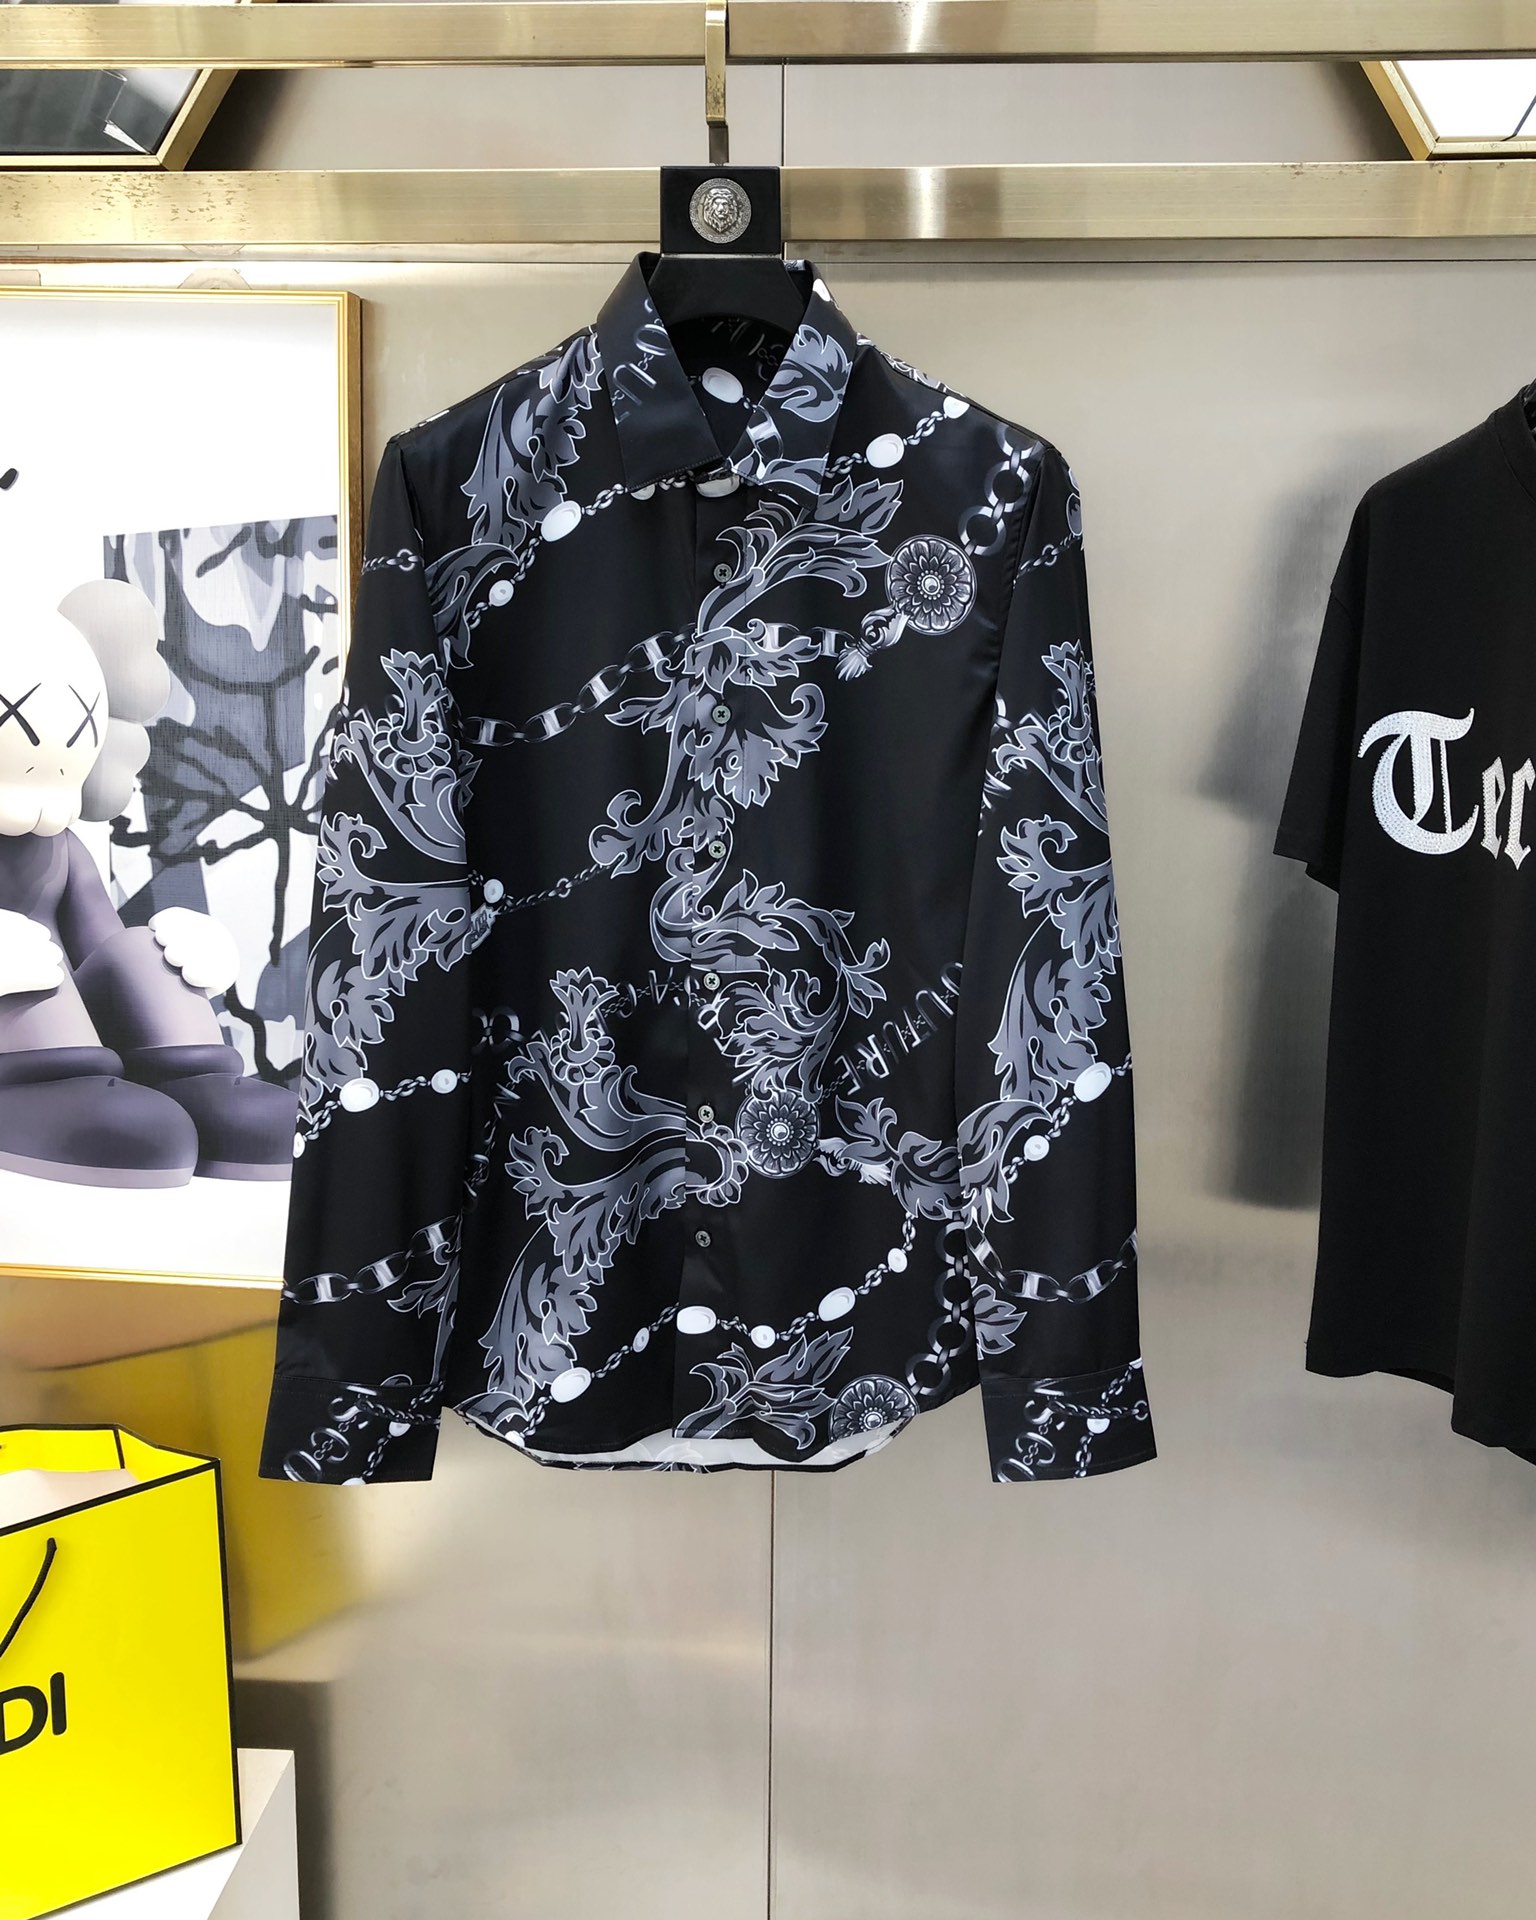 Versace Clothing Shirts & Blouses Best Replica 1:1 Printing Men Cotton Poplin Fabric Fall Collection Fashion Long Sleeve